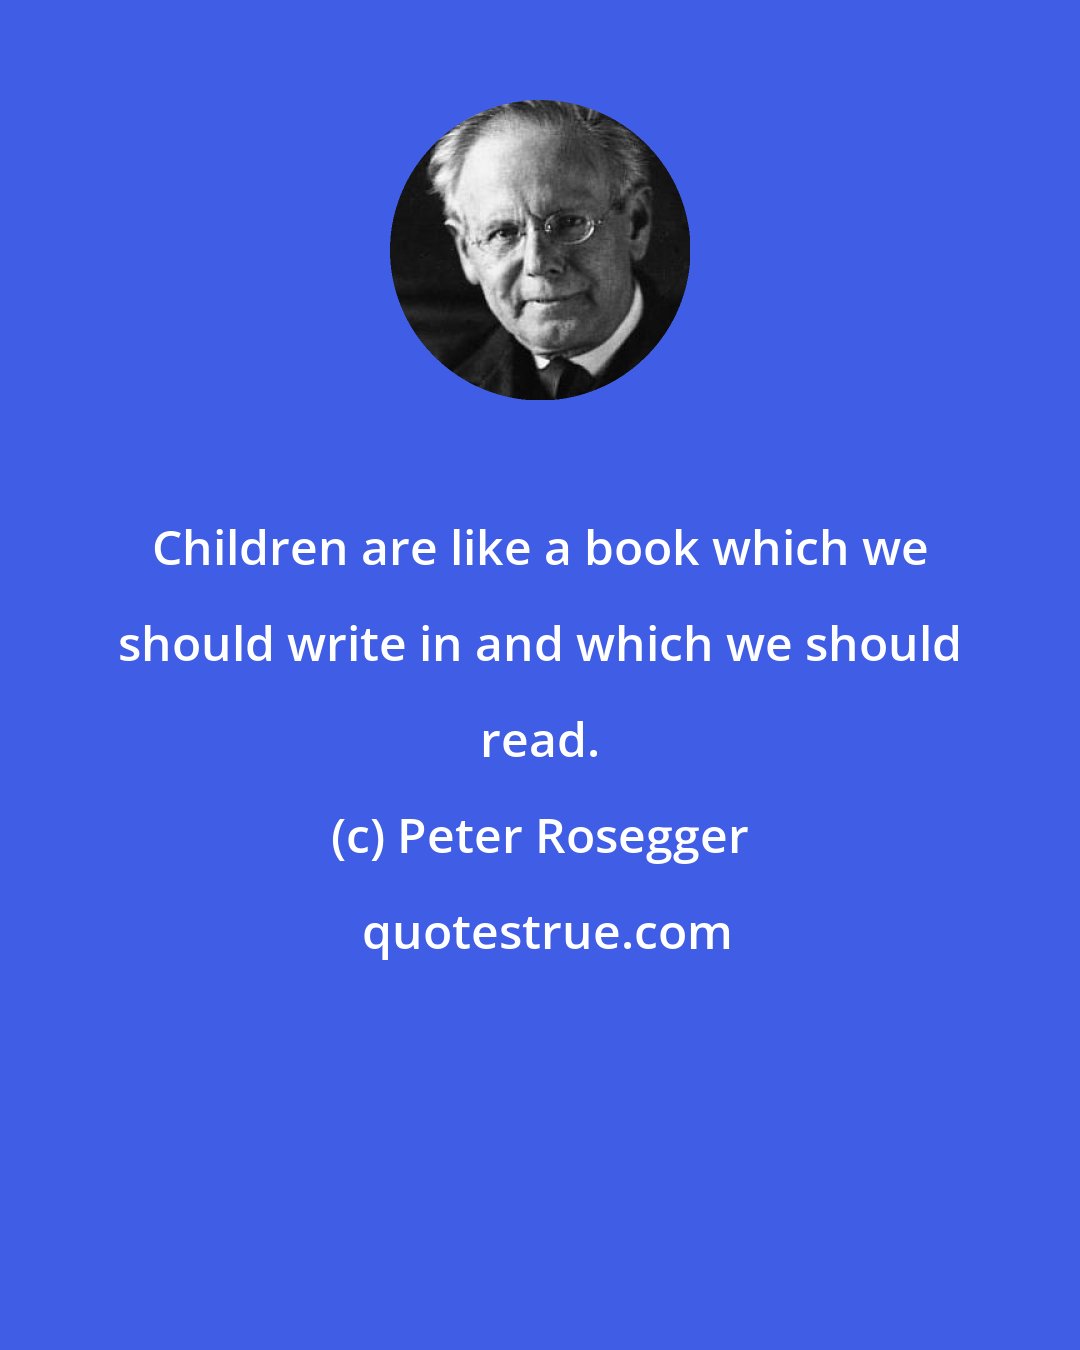 Peter Rosegger: Children are like a book which we should write in and which we should read.